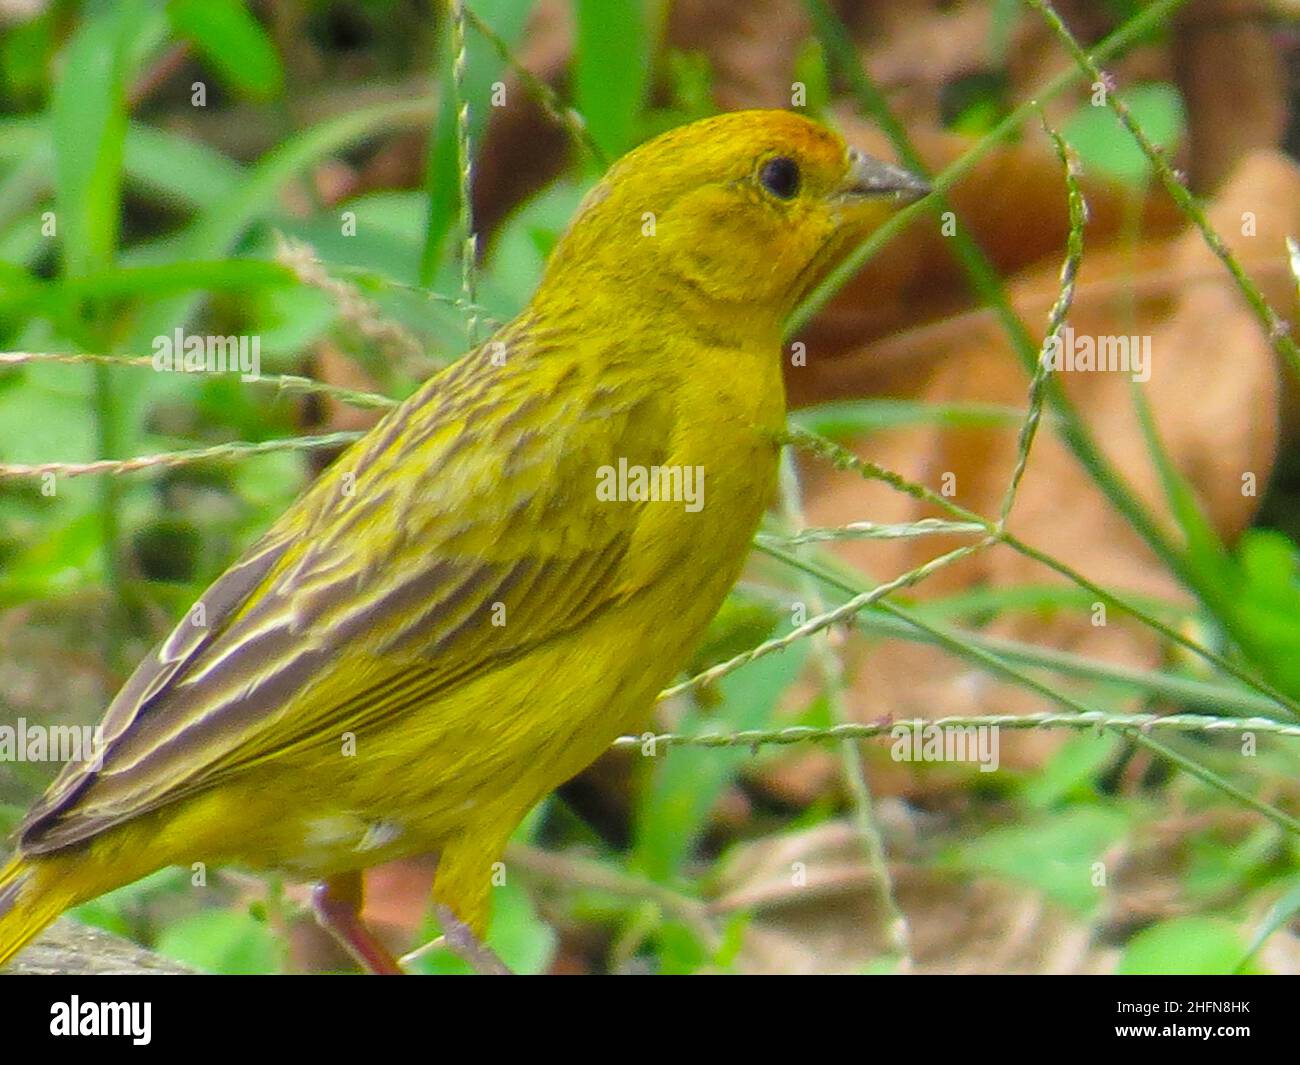 Canary looking for food among the grass Stock Photo